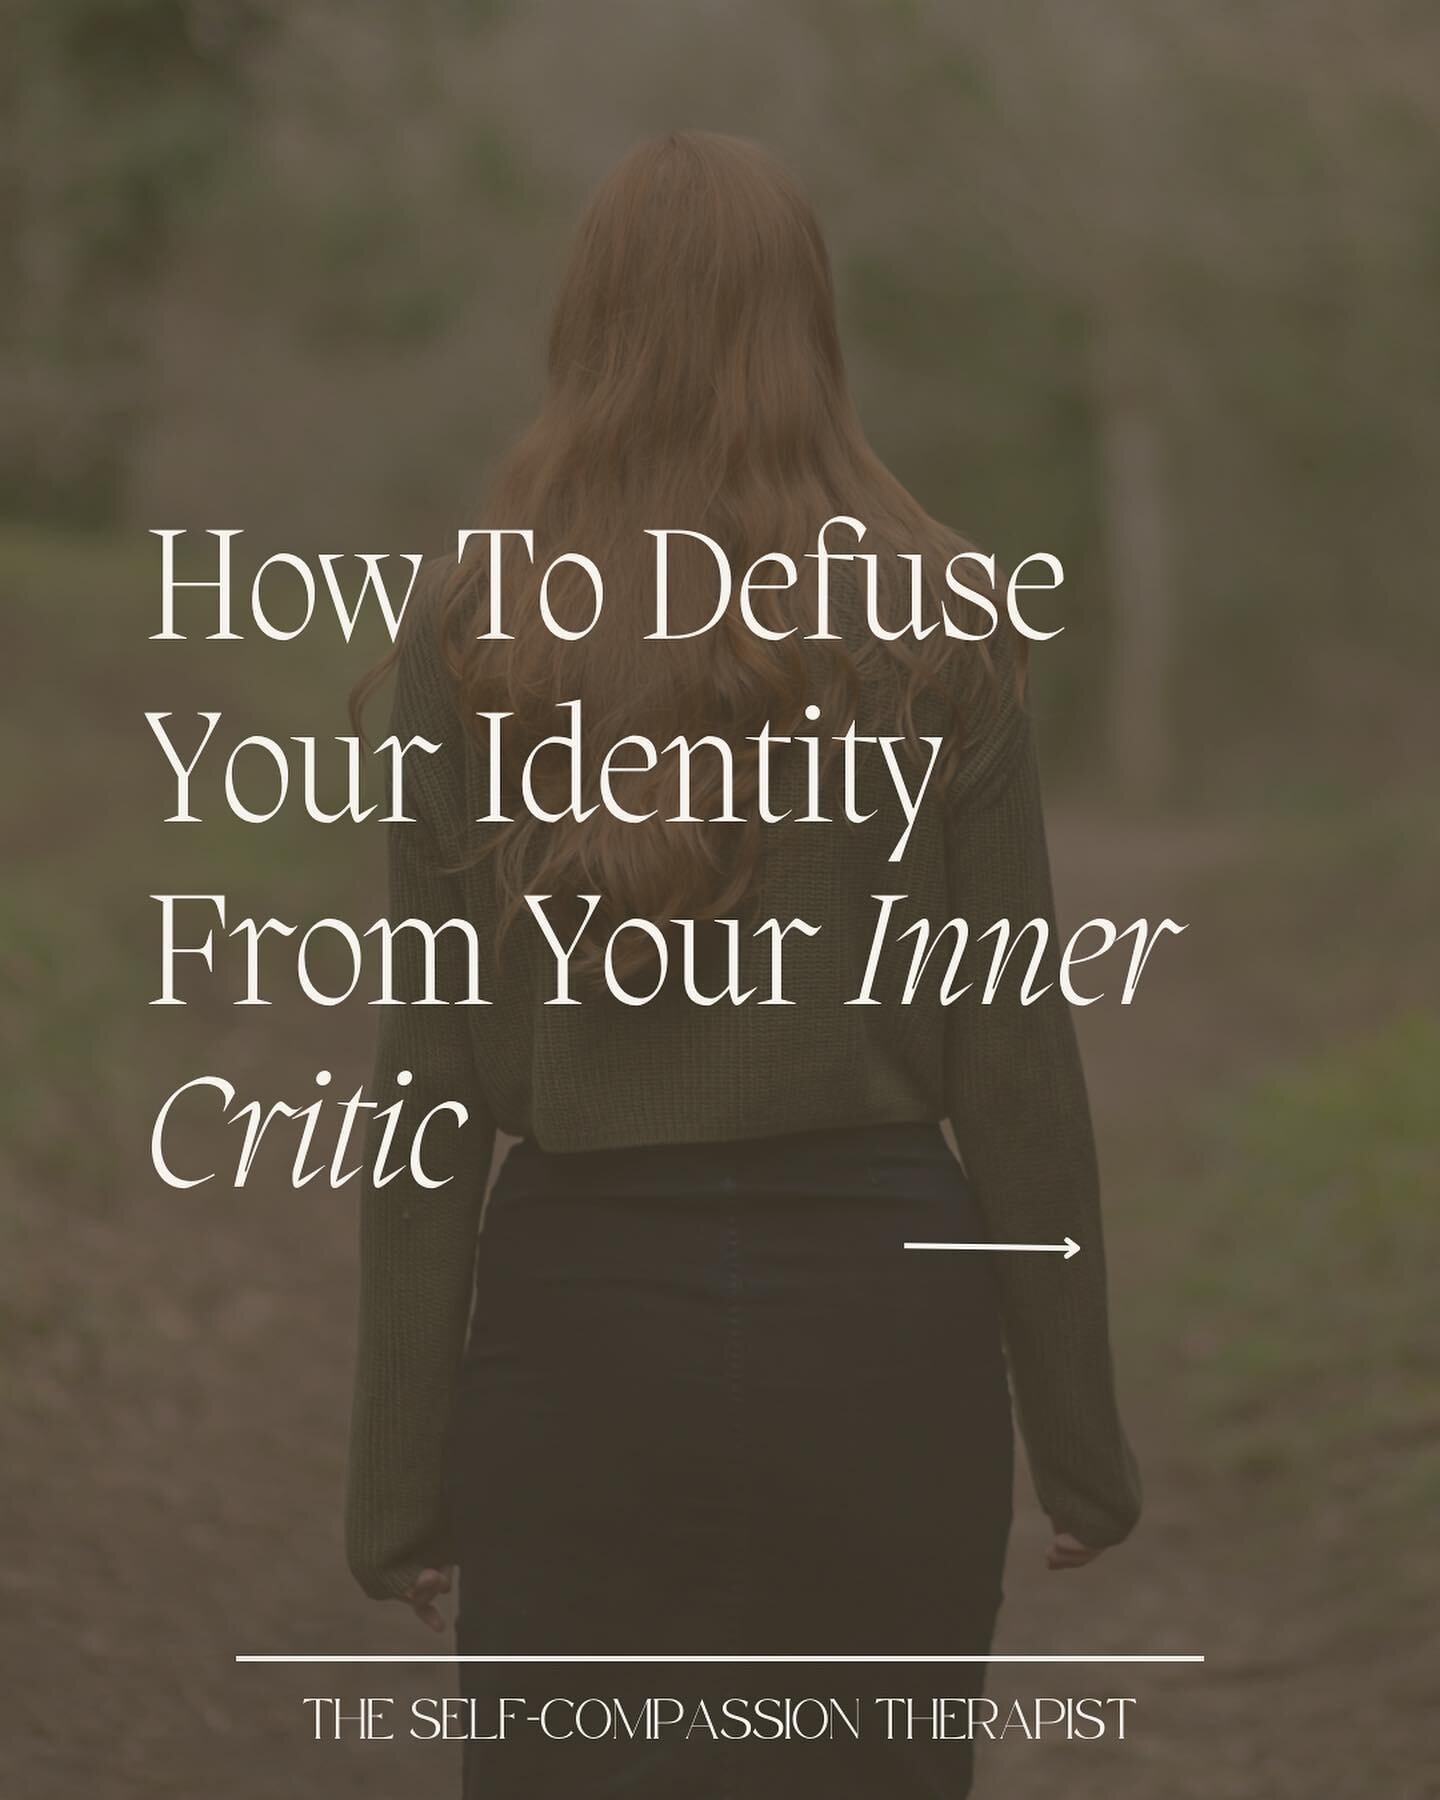 The parts of yourself you identify  with the most can come to feel like the entirety of you - your whole being

💡 When your inner critic runs the show, the thought patterns and feelings that your inner critic perpetuates feel indistinguishable from 